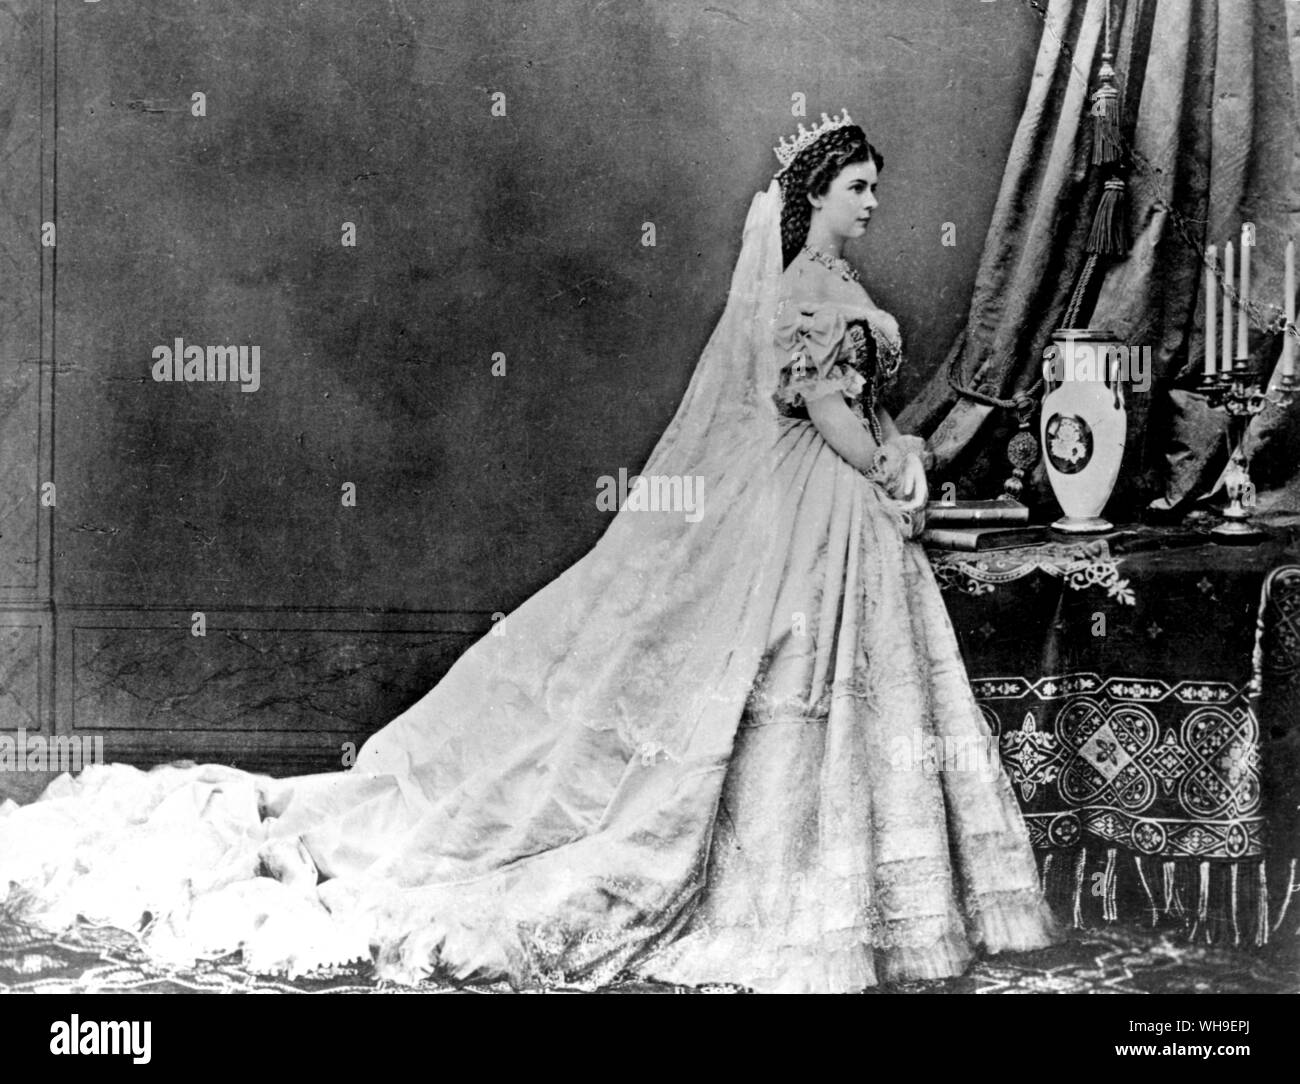 Elizabeth of Austria. Photograph taken at Coronation as Queen of Hungary, aged 29 years old. Late 19th century. Stock Photo